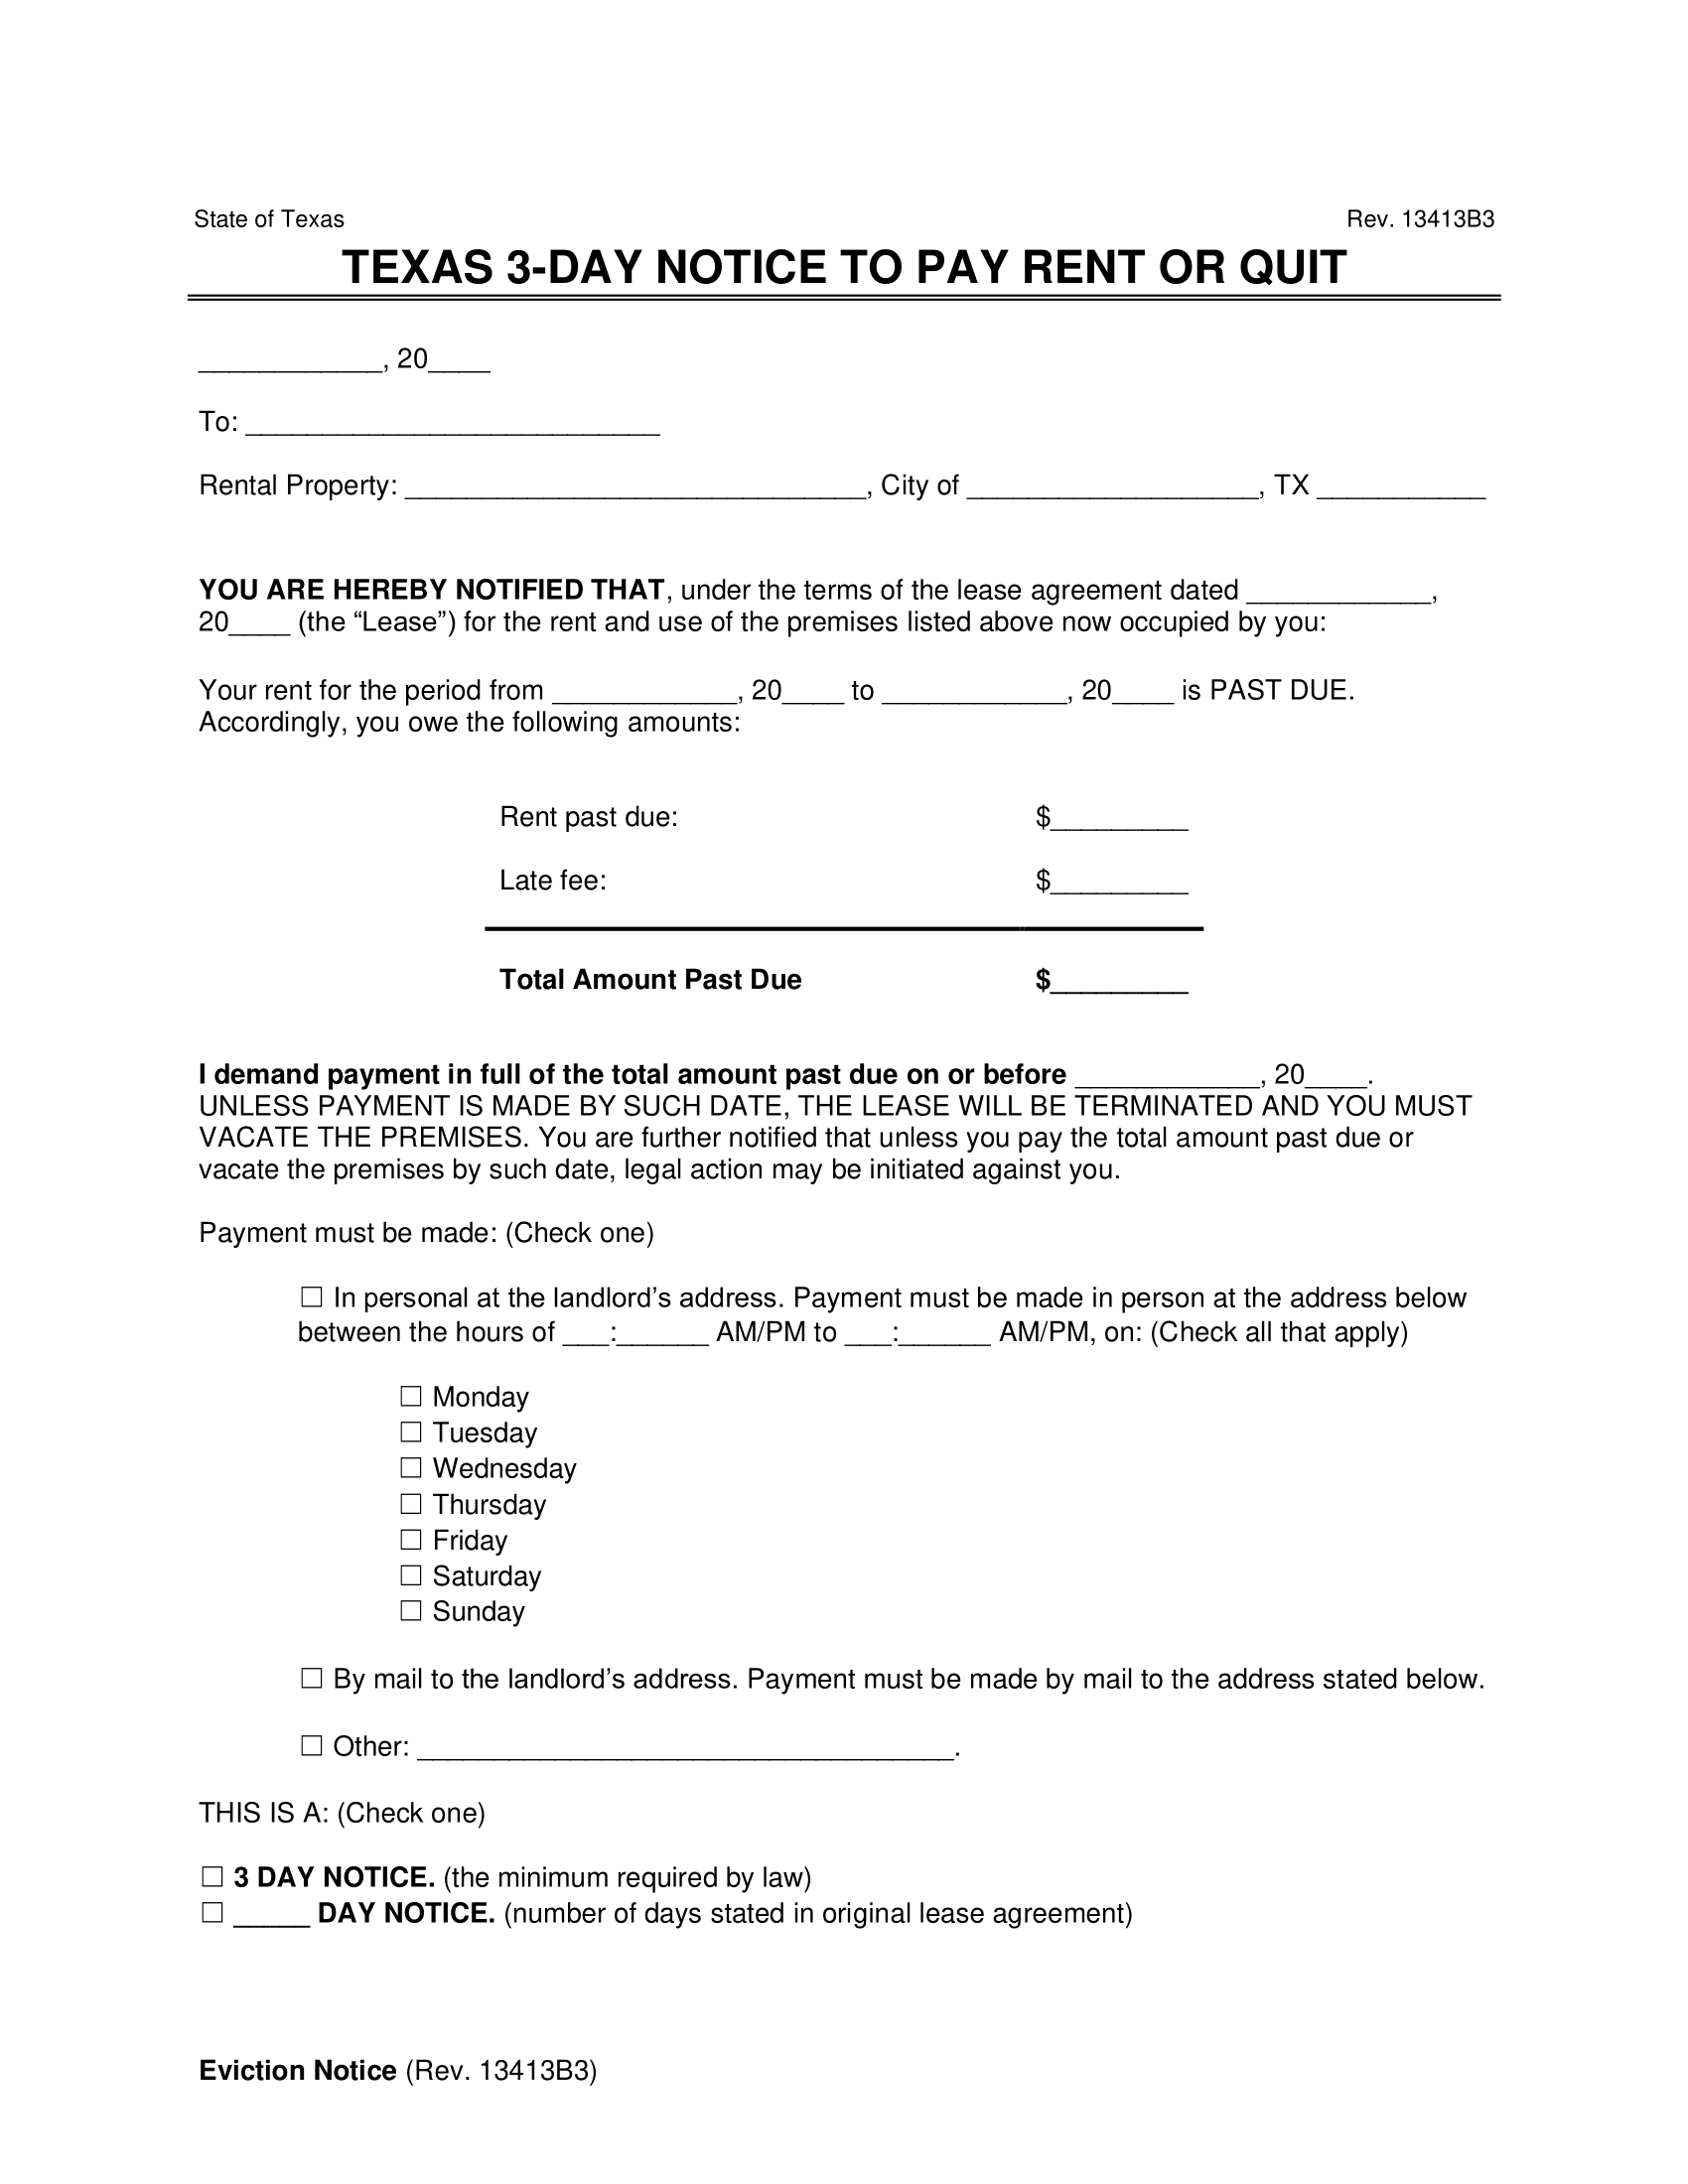 Texas 3-Day Eviction Notice to Quit (Non-Payment of Rent)